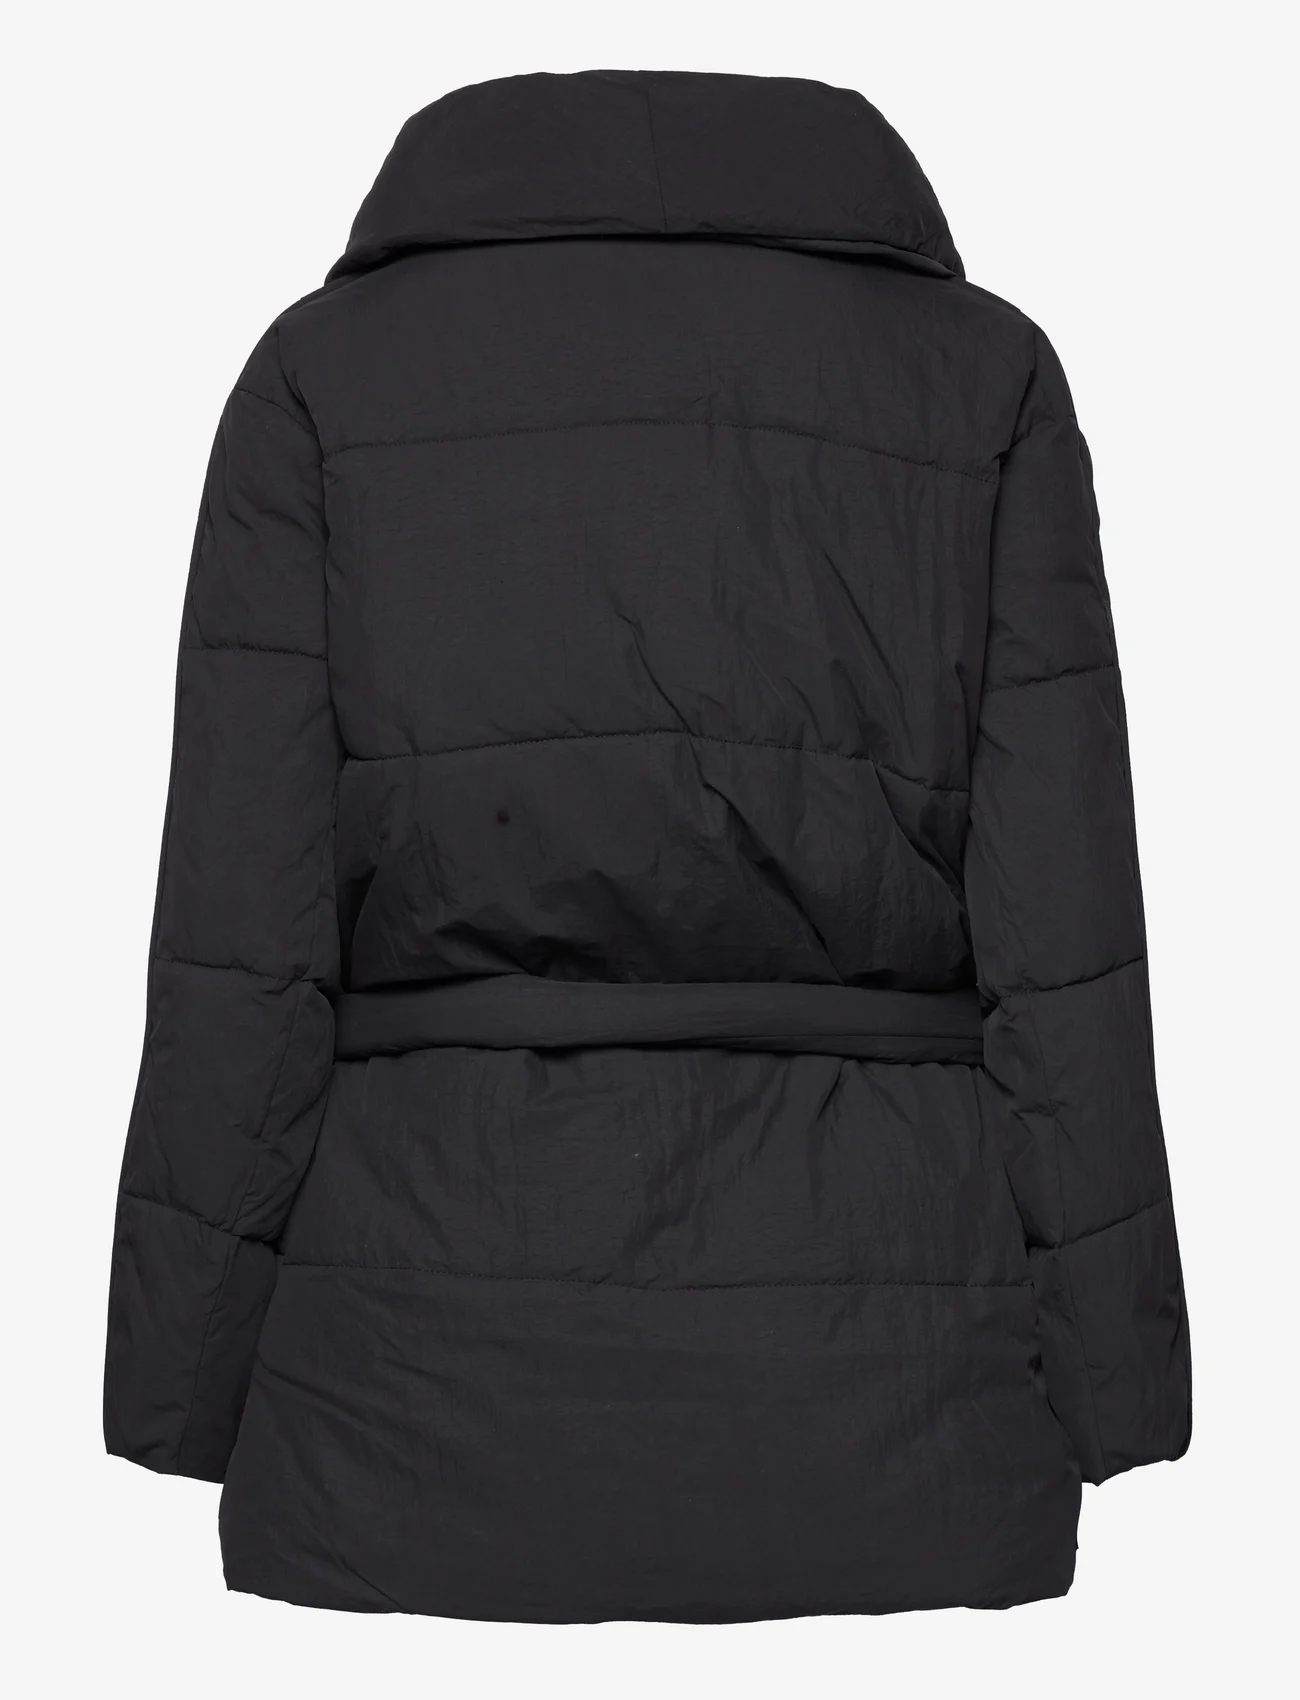 Esprit Casual - Quilted puffer jacket with belt - kurtki puchowe - black - 1